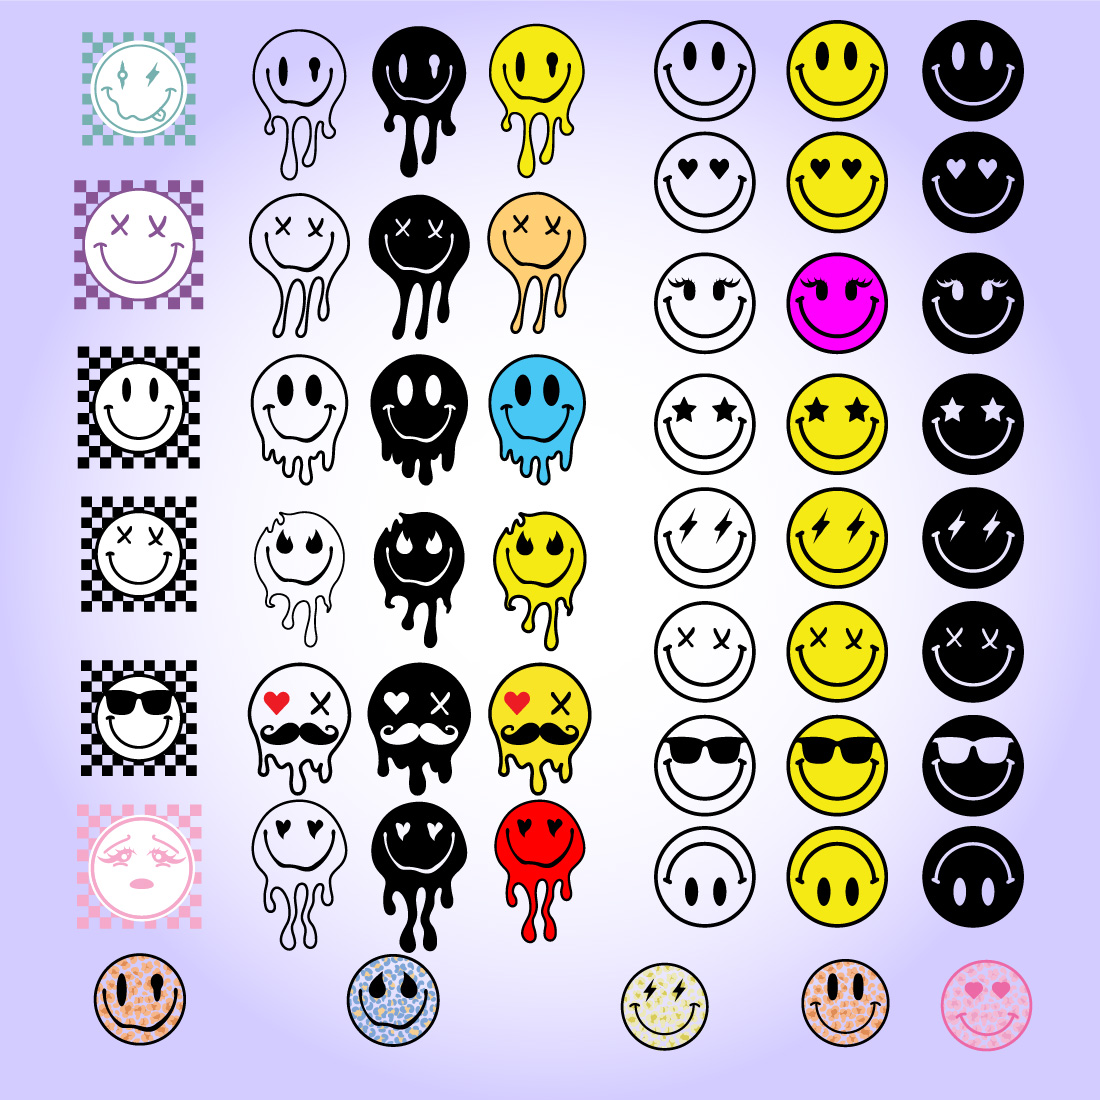 Smiley face svg, smiley silhouettes, drippy smiley svg, melting smiley svg, checkered smiley svg, happy face svg, emoji svg, smiles, trendy svg, png cut file preview image.